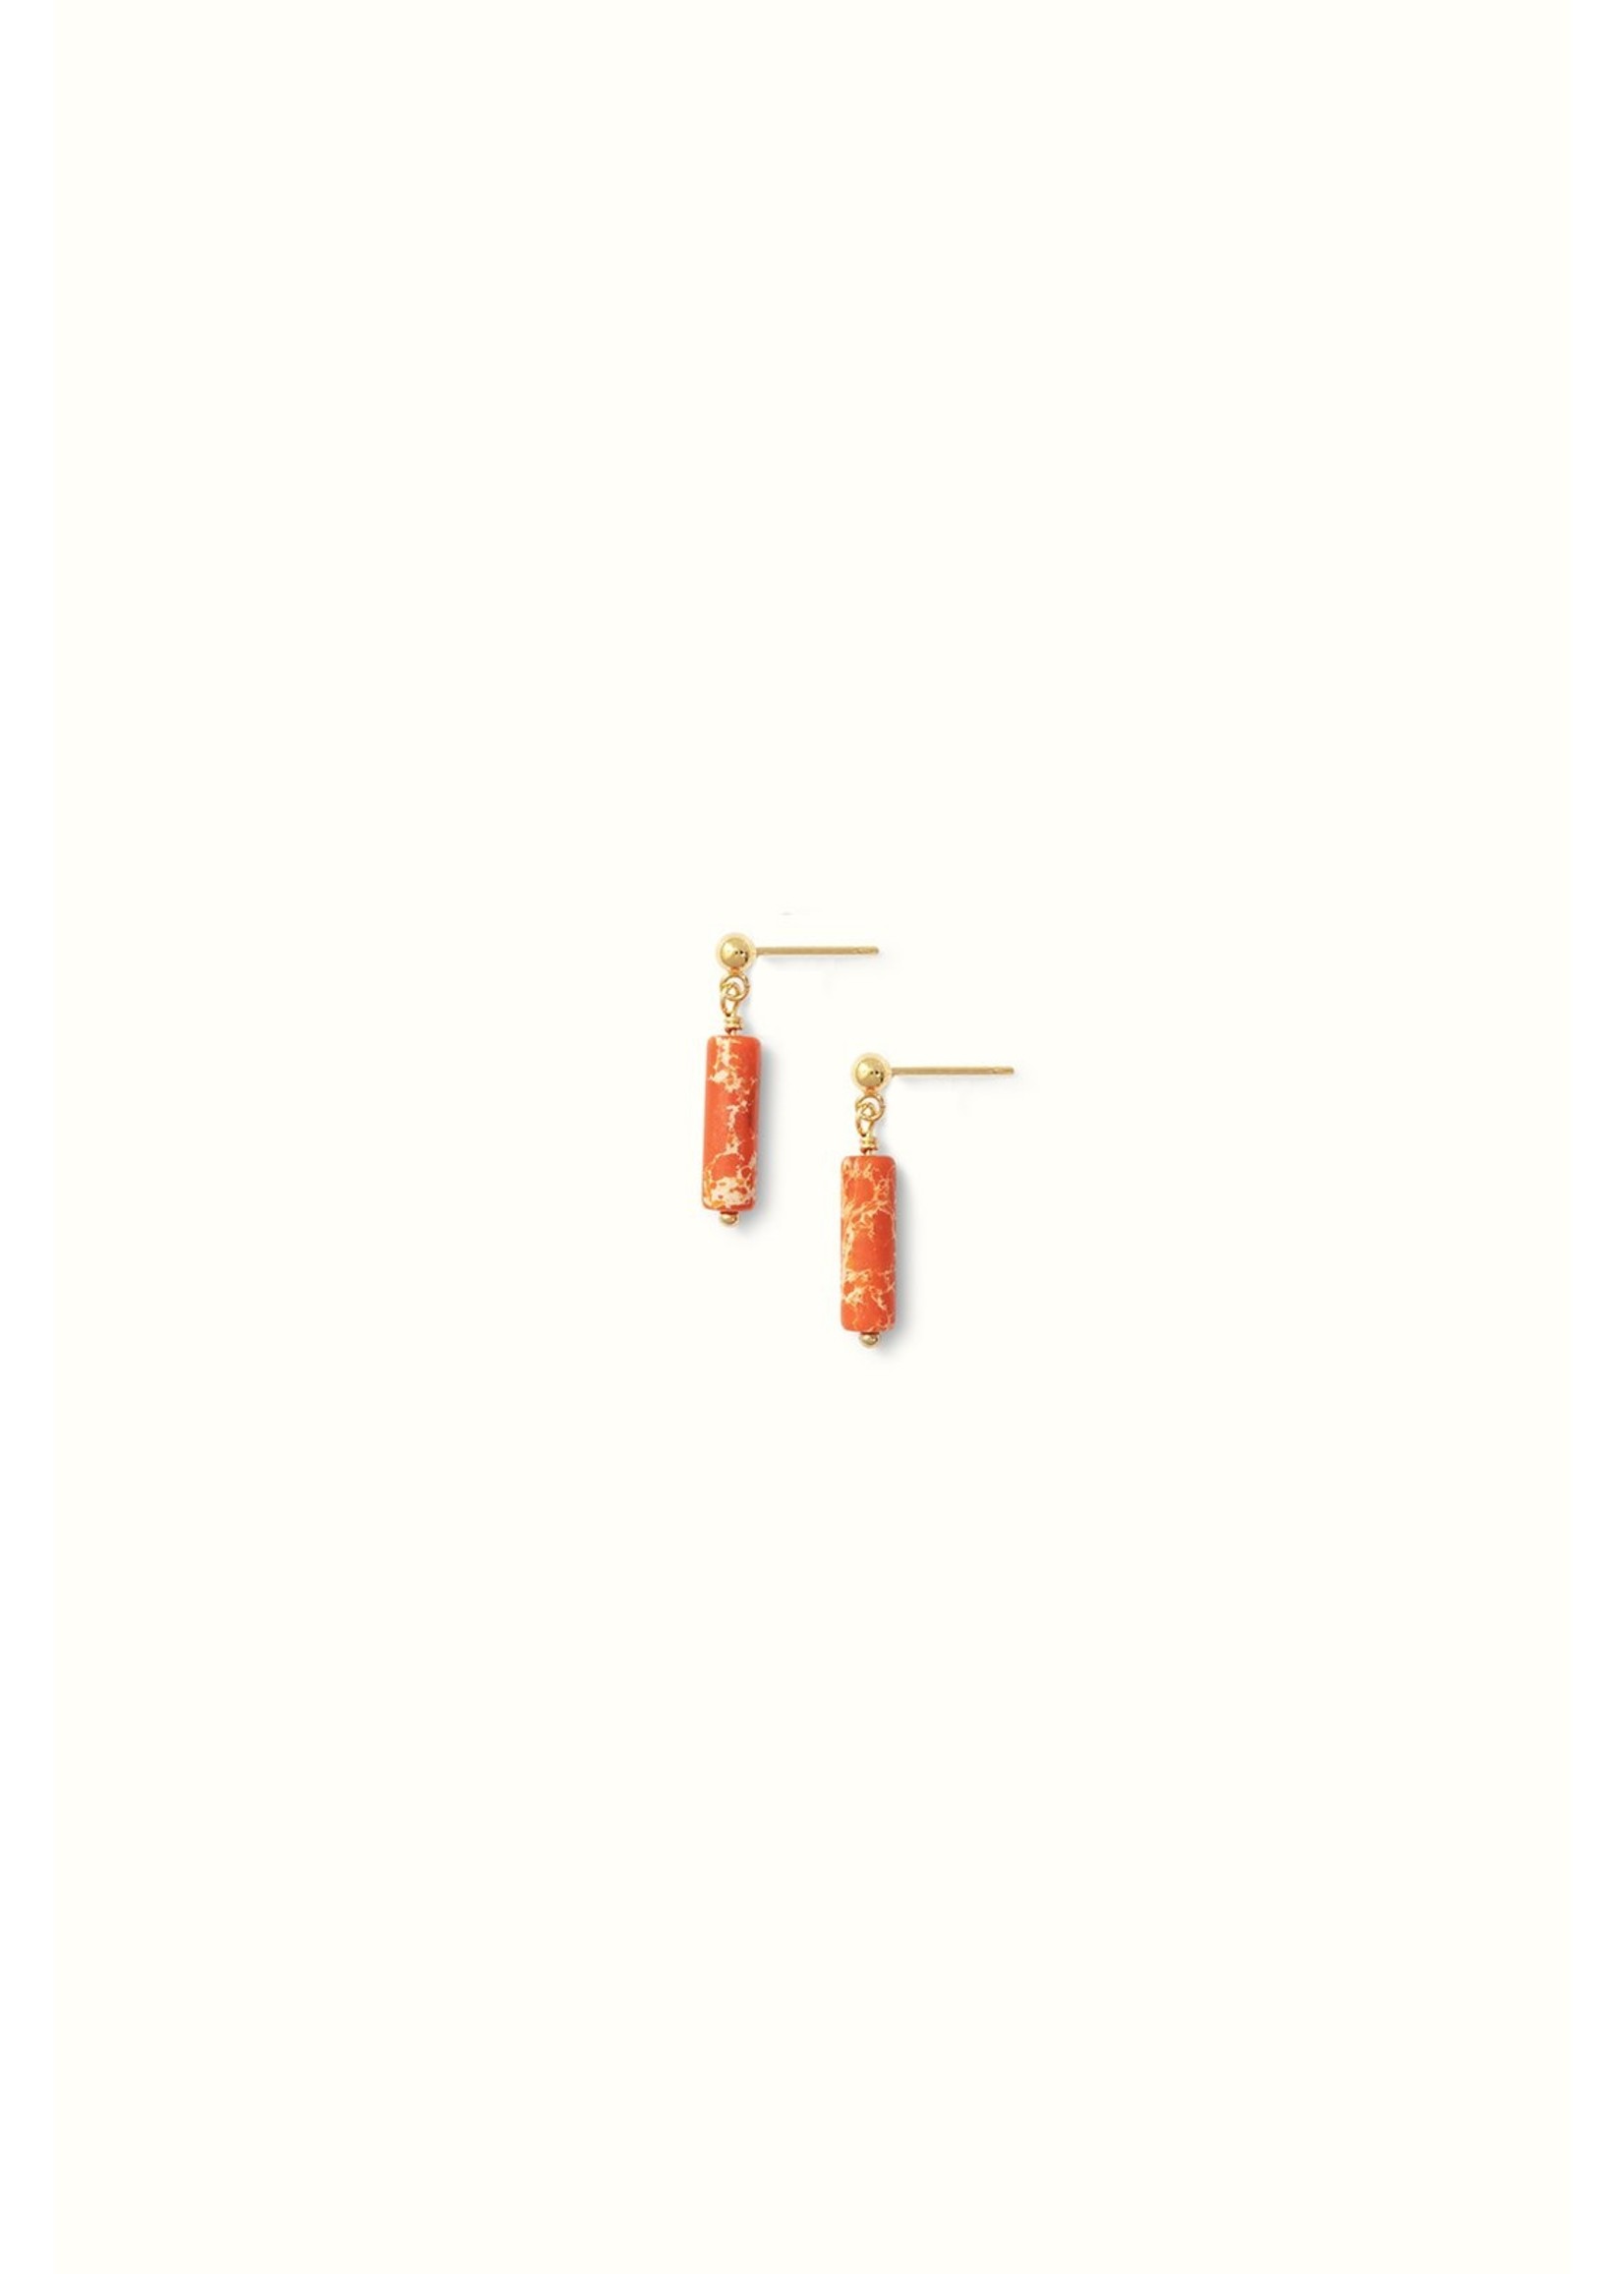 Nown Rudy Drop Earring Gold Filled Pair